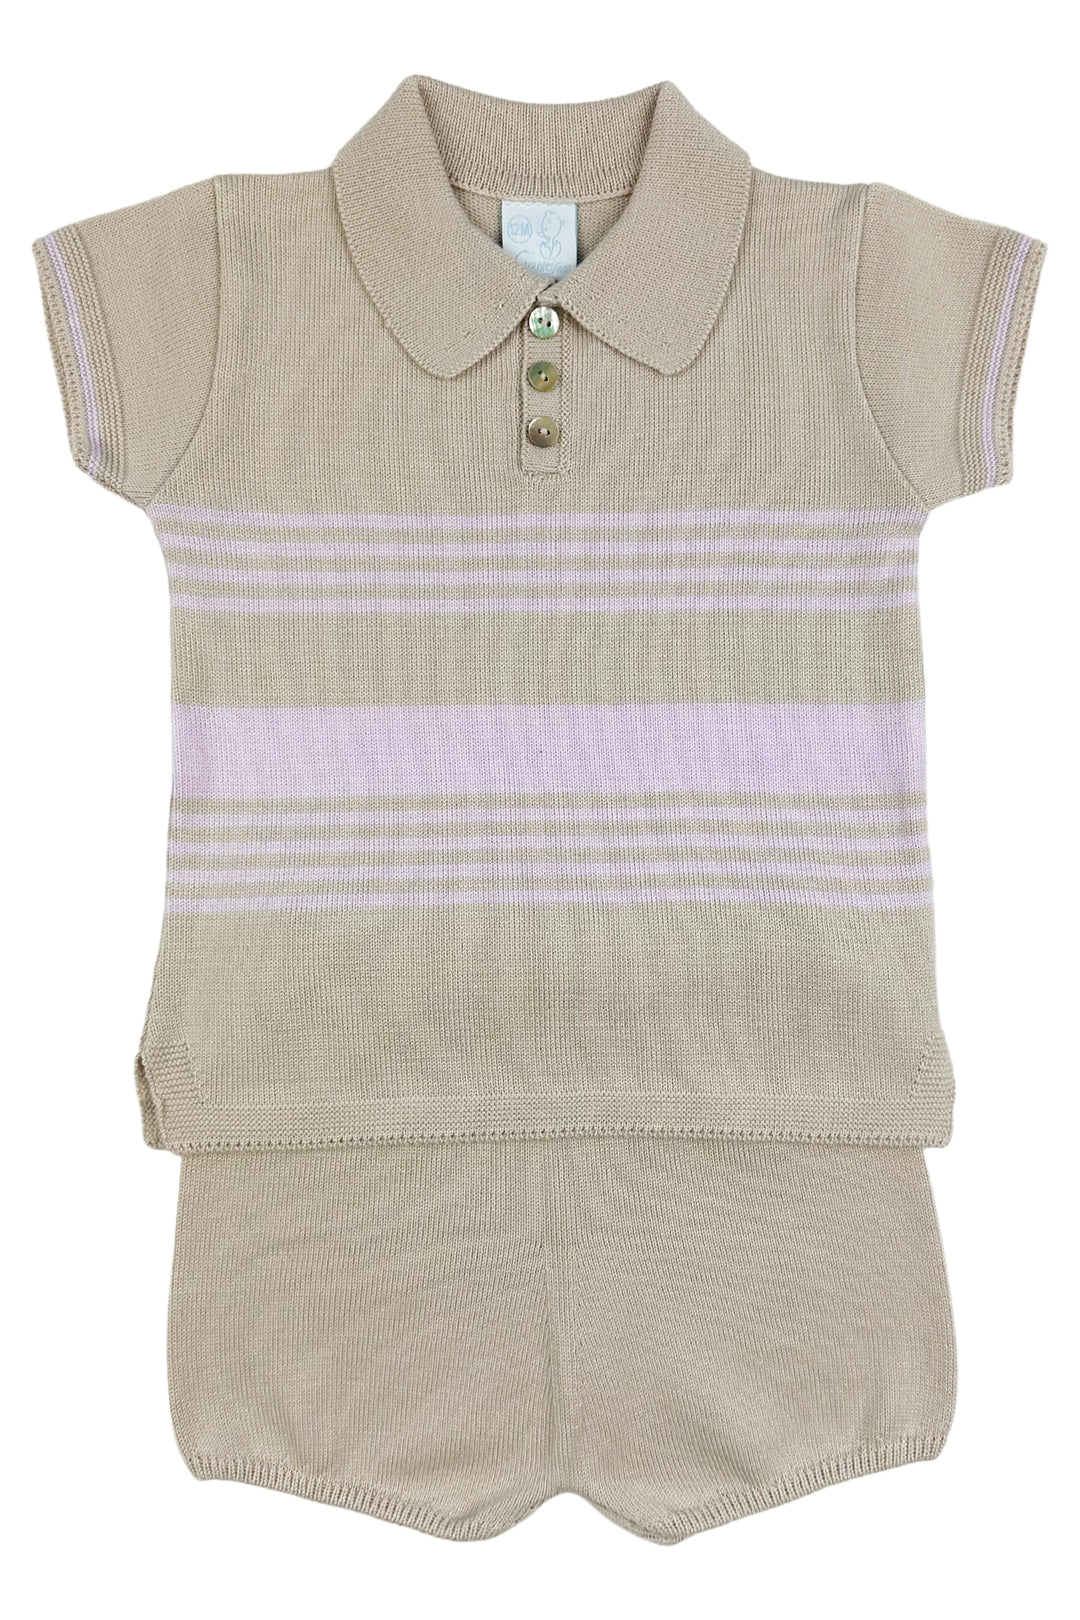 Granlei "Timmy" Stone & Lilac Stripe Knit Top & Shorts | Millie and John